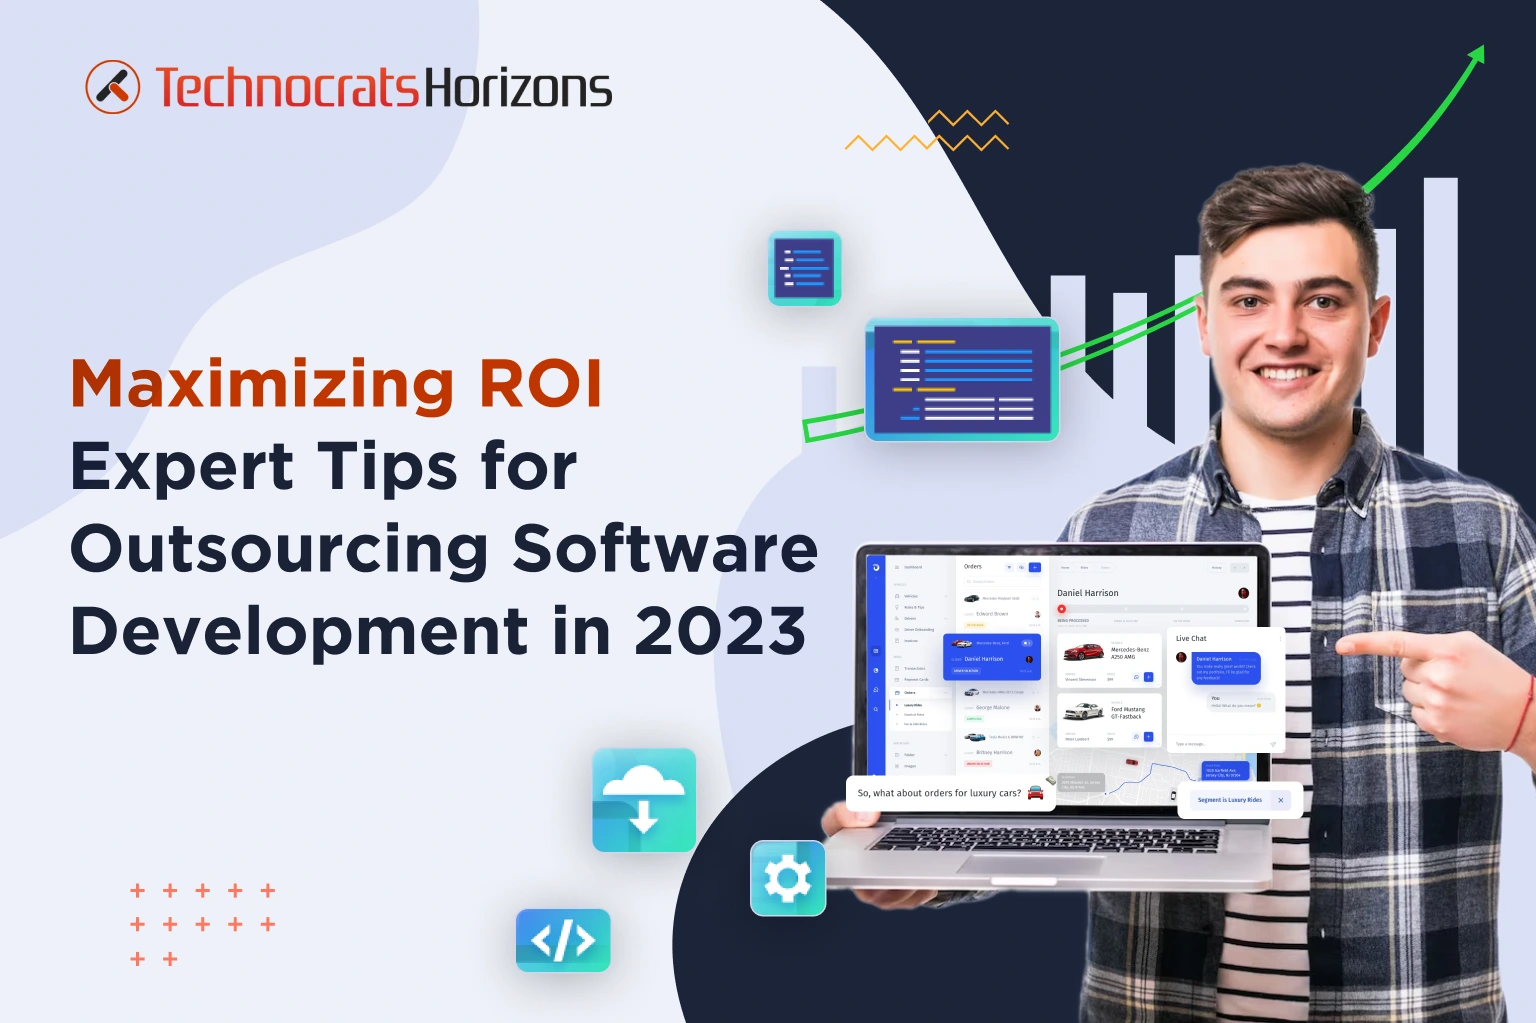 The Ultimate Guide to Outsourcing Software Development in 2023: Expert Tips and Proven Strategies for Success